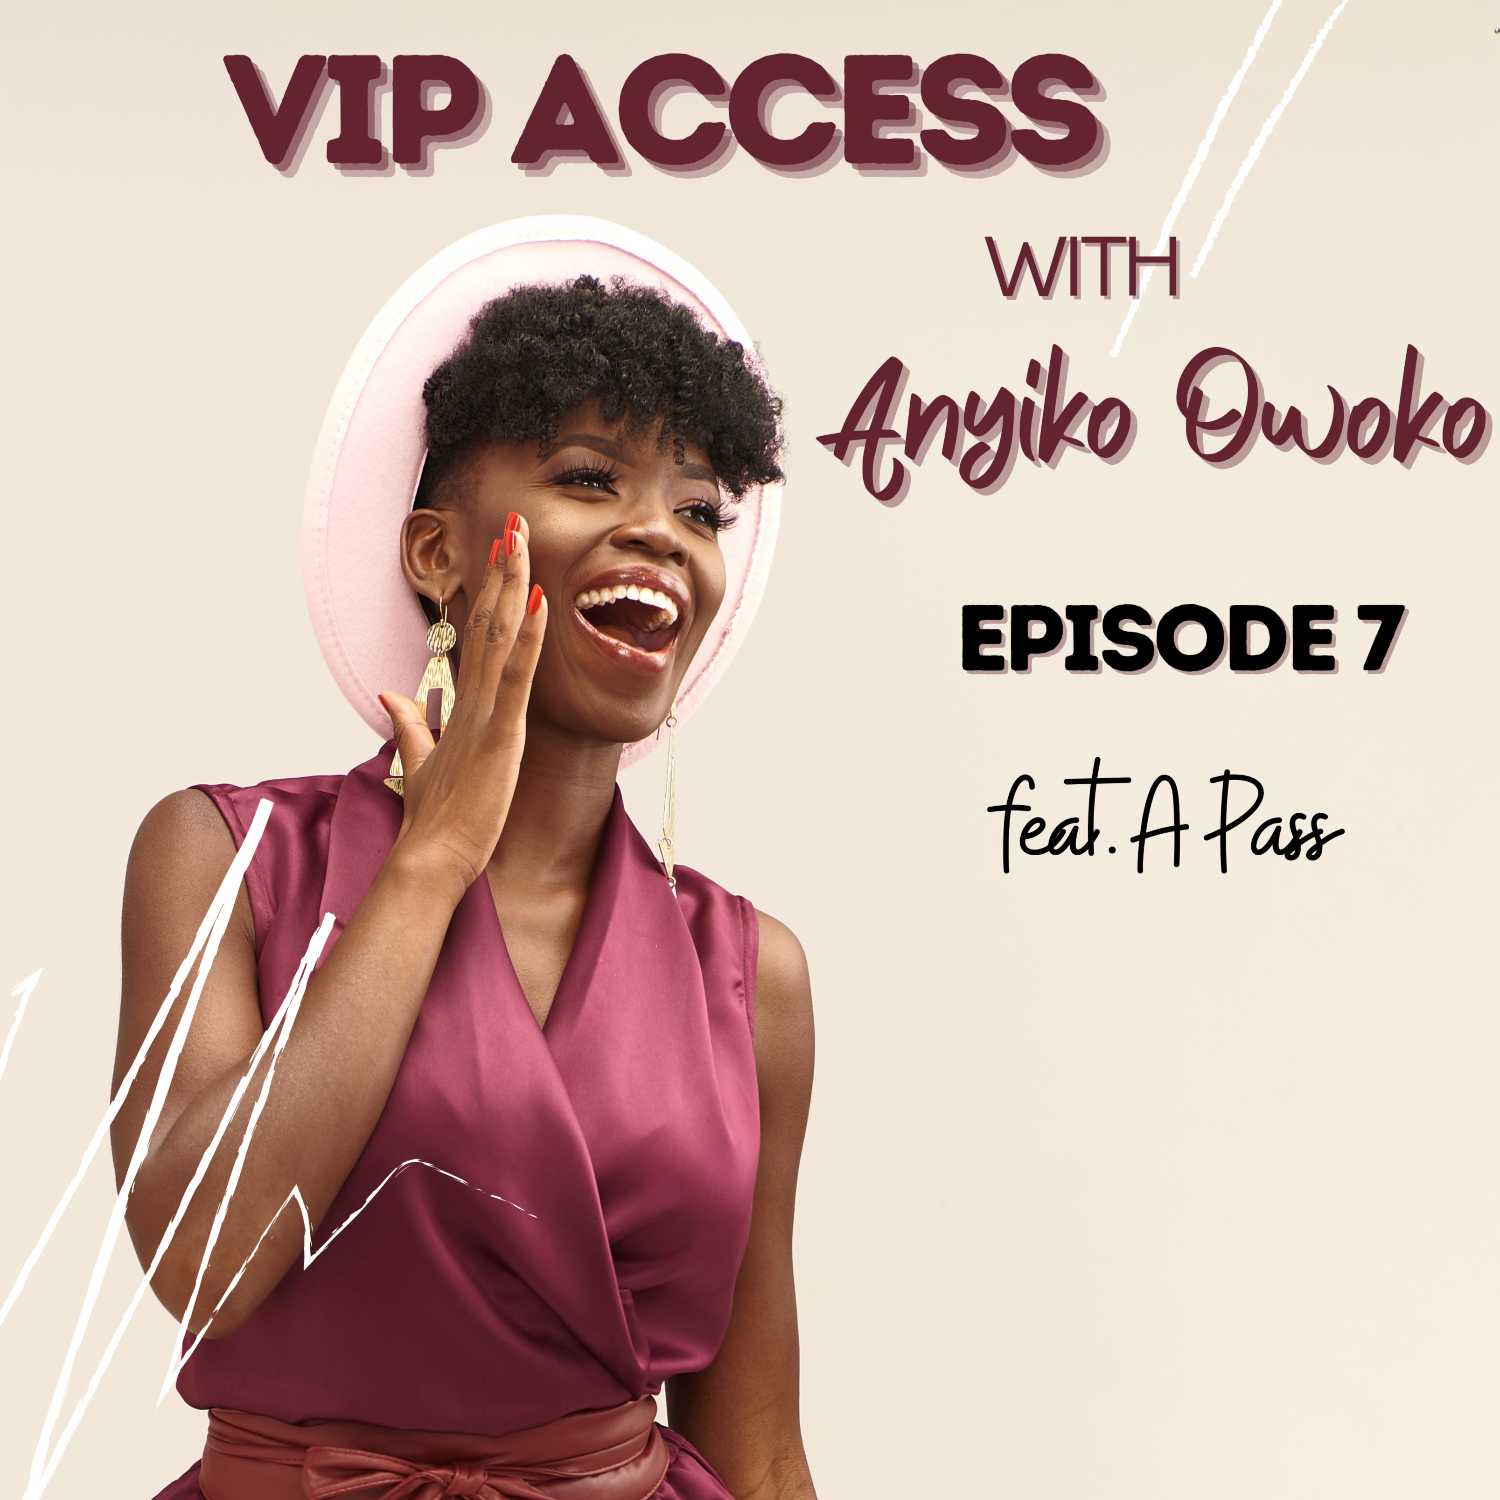 Ep 7. Part 1: A Pass on Ugandan Showbiz - Underrated or Overrated?